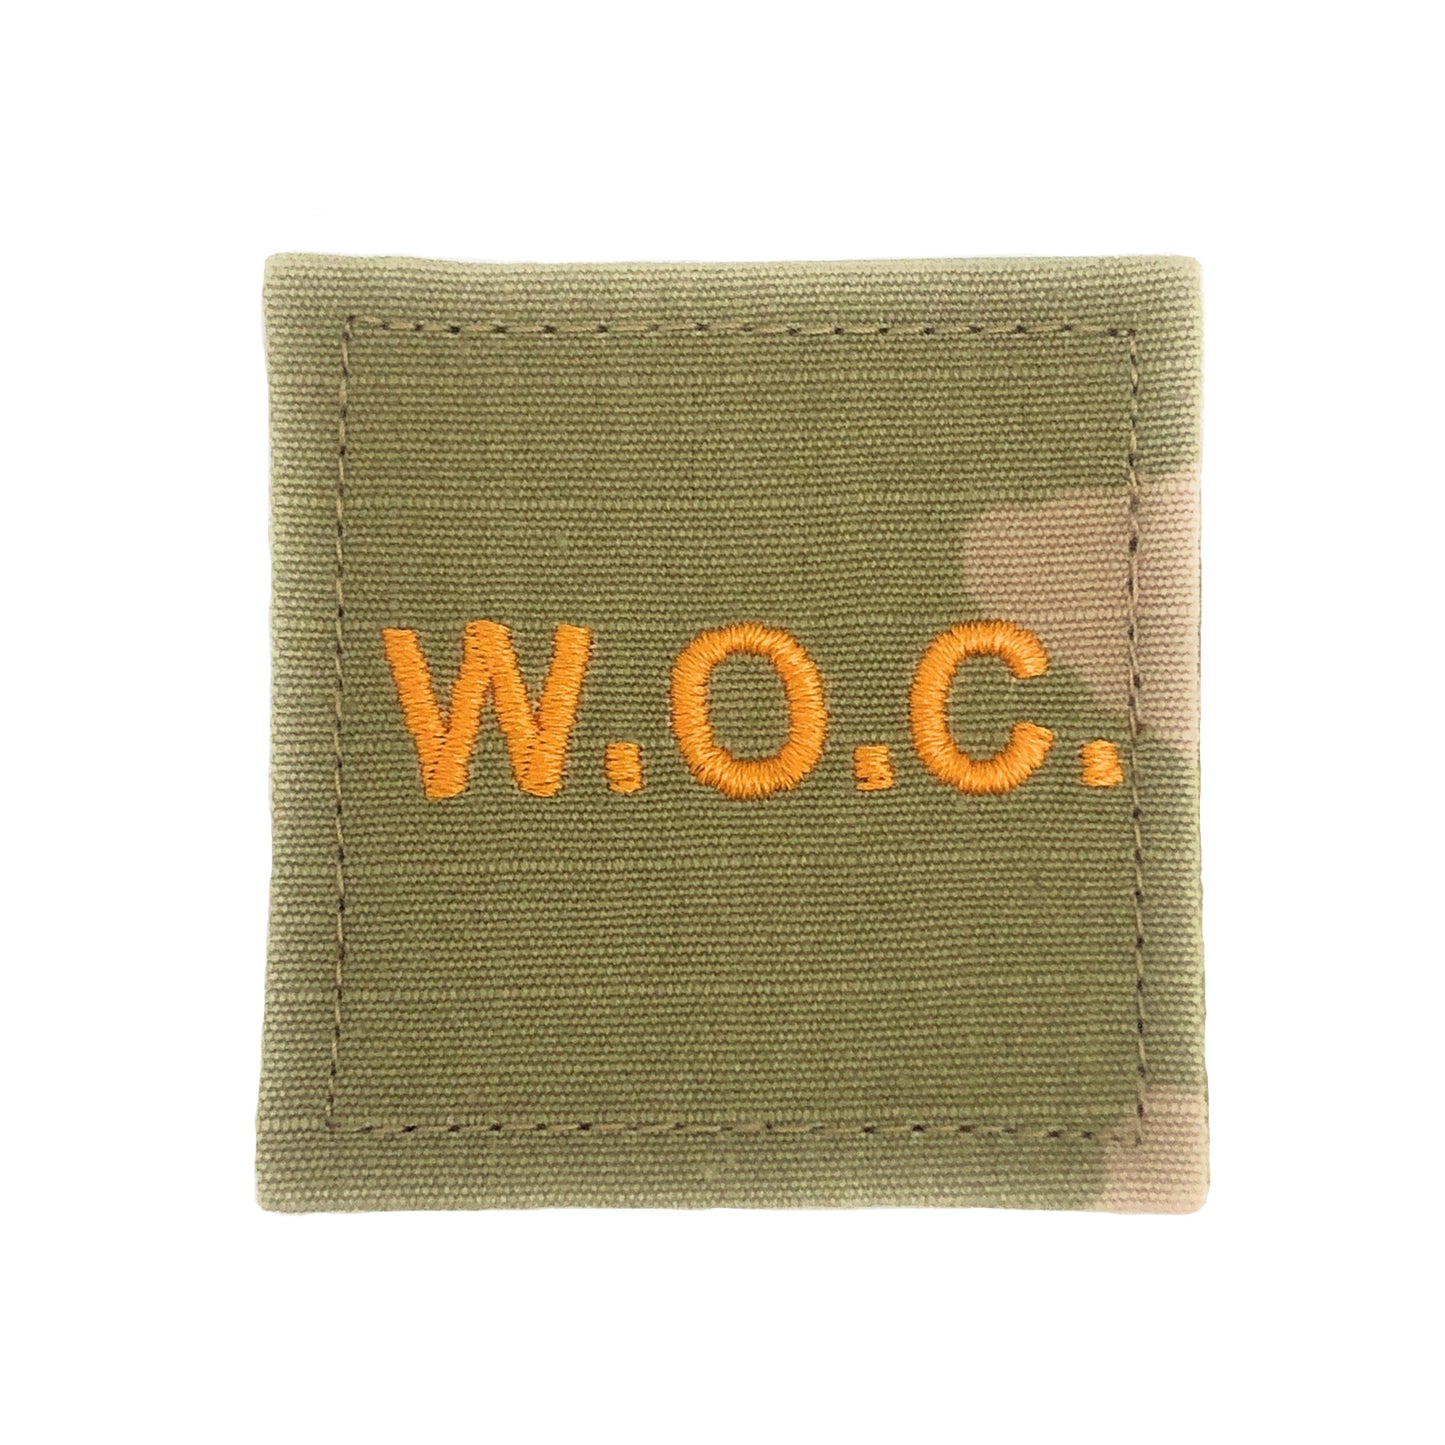 US Army WOC Warrant Officer Candidate Gold Letters OCP with Hook Fastener (EA)